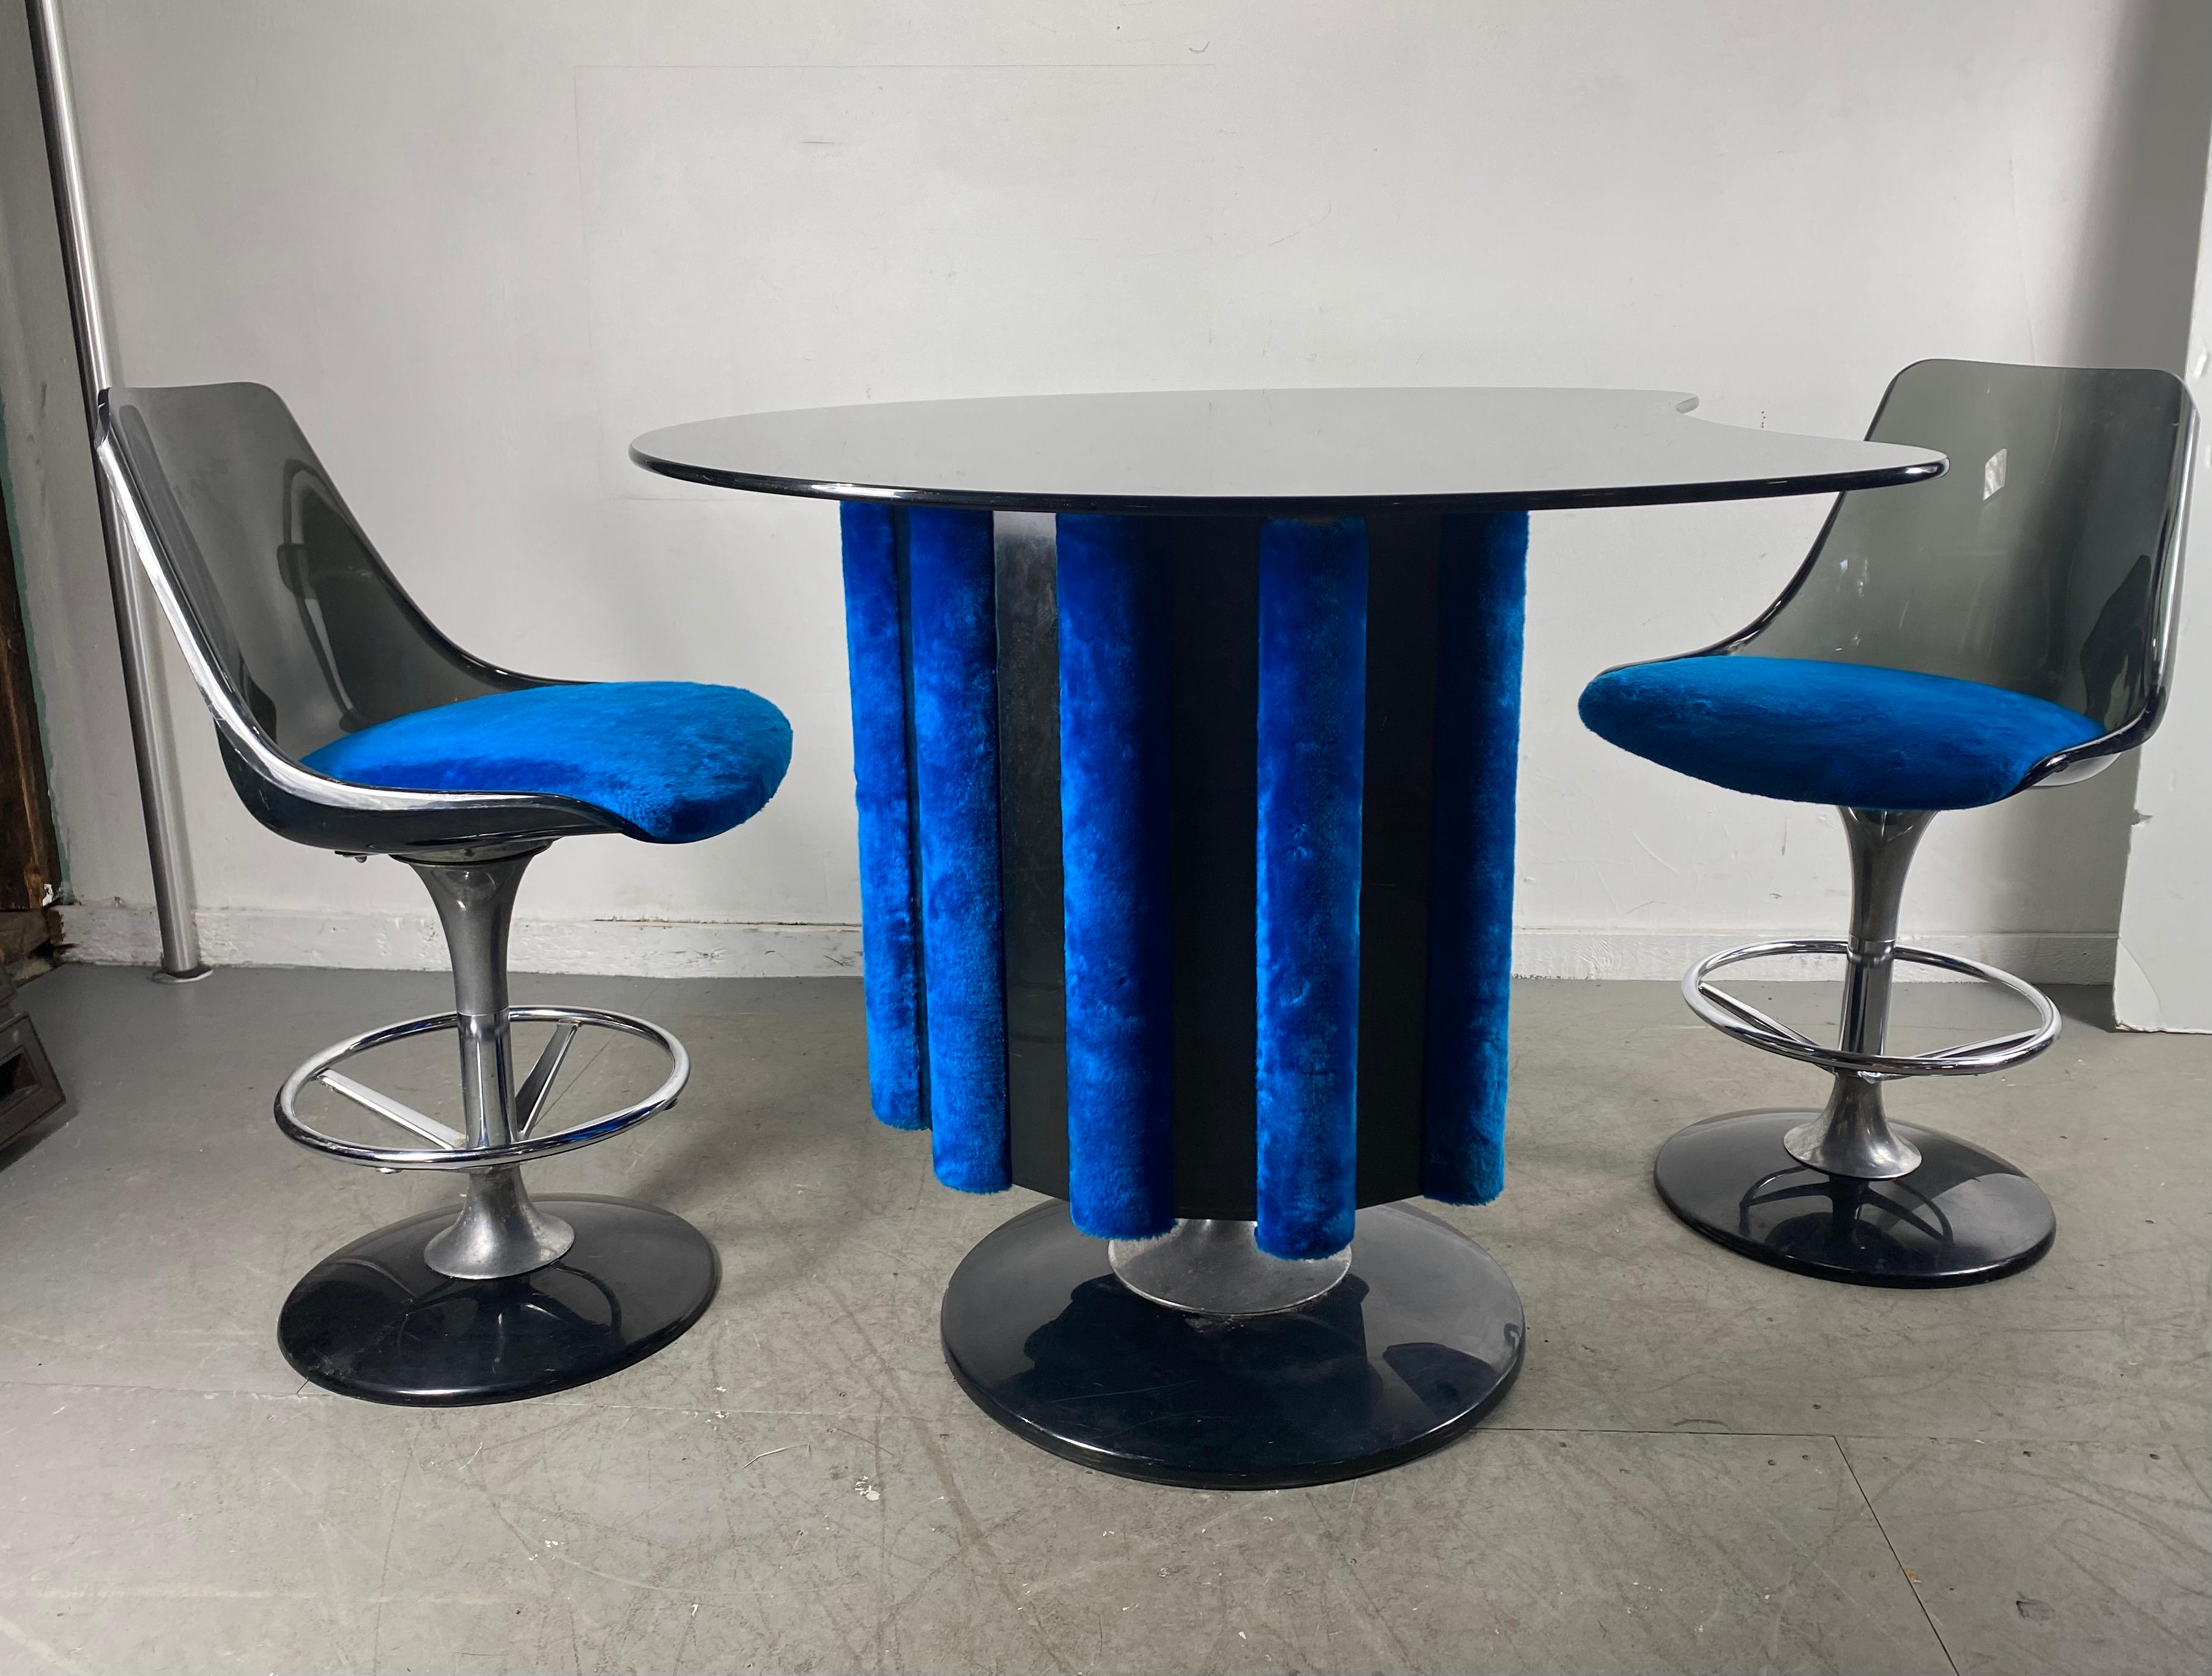 1970s Space Age Three-Piece Pedestal Dry Bar with Two Stools by Chrome Craft 2